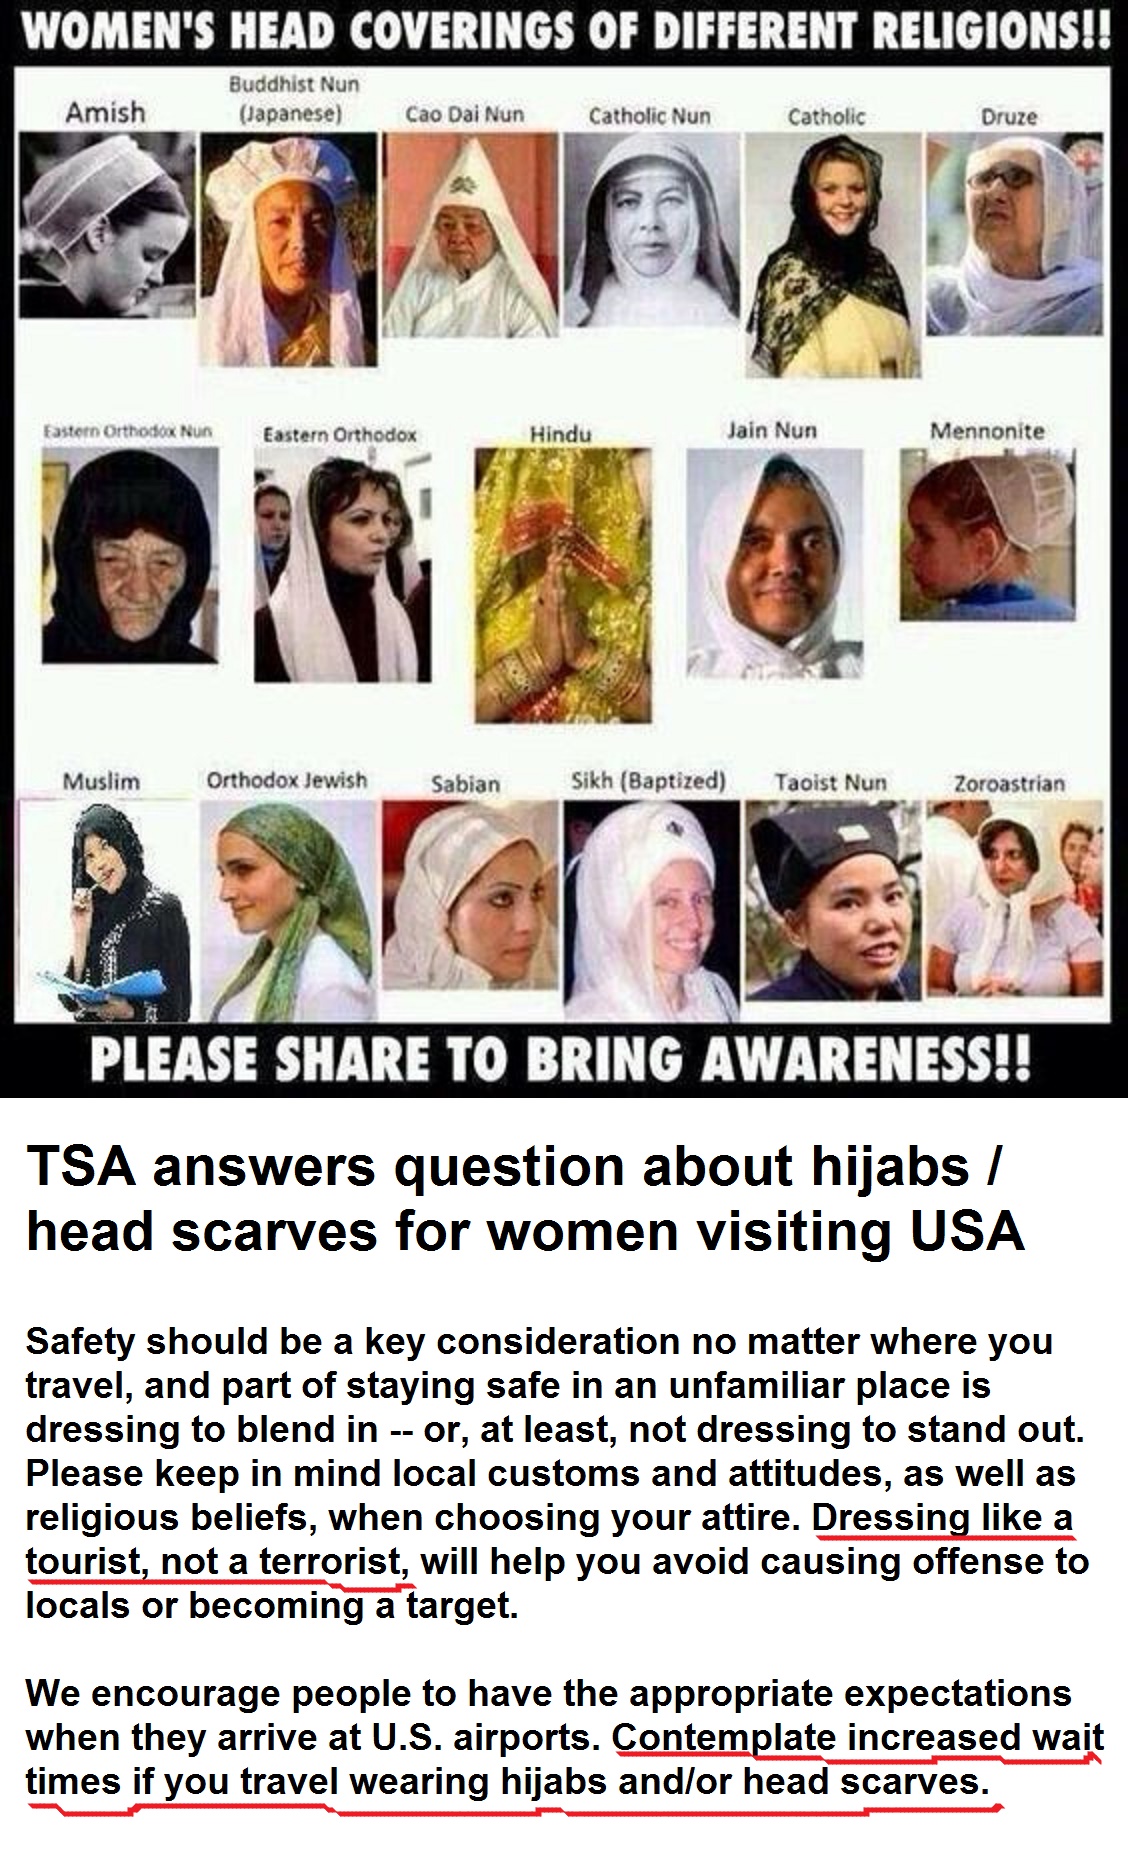 TSA answers question about hijabs / head scarves for women visiting USA Safety should be a key consideration no matter where you travel, and part of staying safe in an unfamiliar place is dressing to blend in -- or, at least, not dressing to stand out. Please keep in mind local customs and attitudes, as well as religious beliefs, when choosing your attire. Dressing like a tourist, not a terrorist, will help you avoid causing offense to locals or becoming a target. We encourage people to have the appropriate expectations when they arrive at U.S. airports. Contemplate increased wait times if you travel wearing hijabs and/or head scarves.